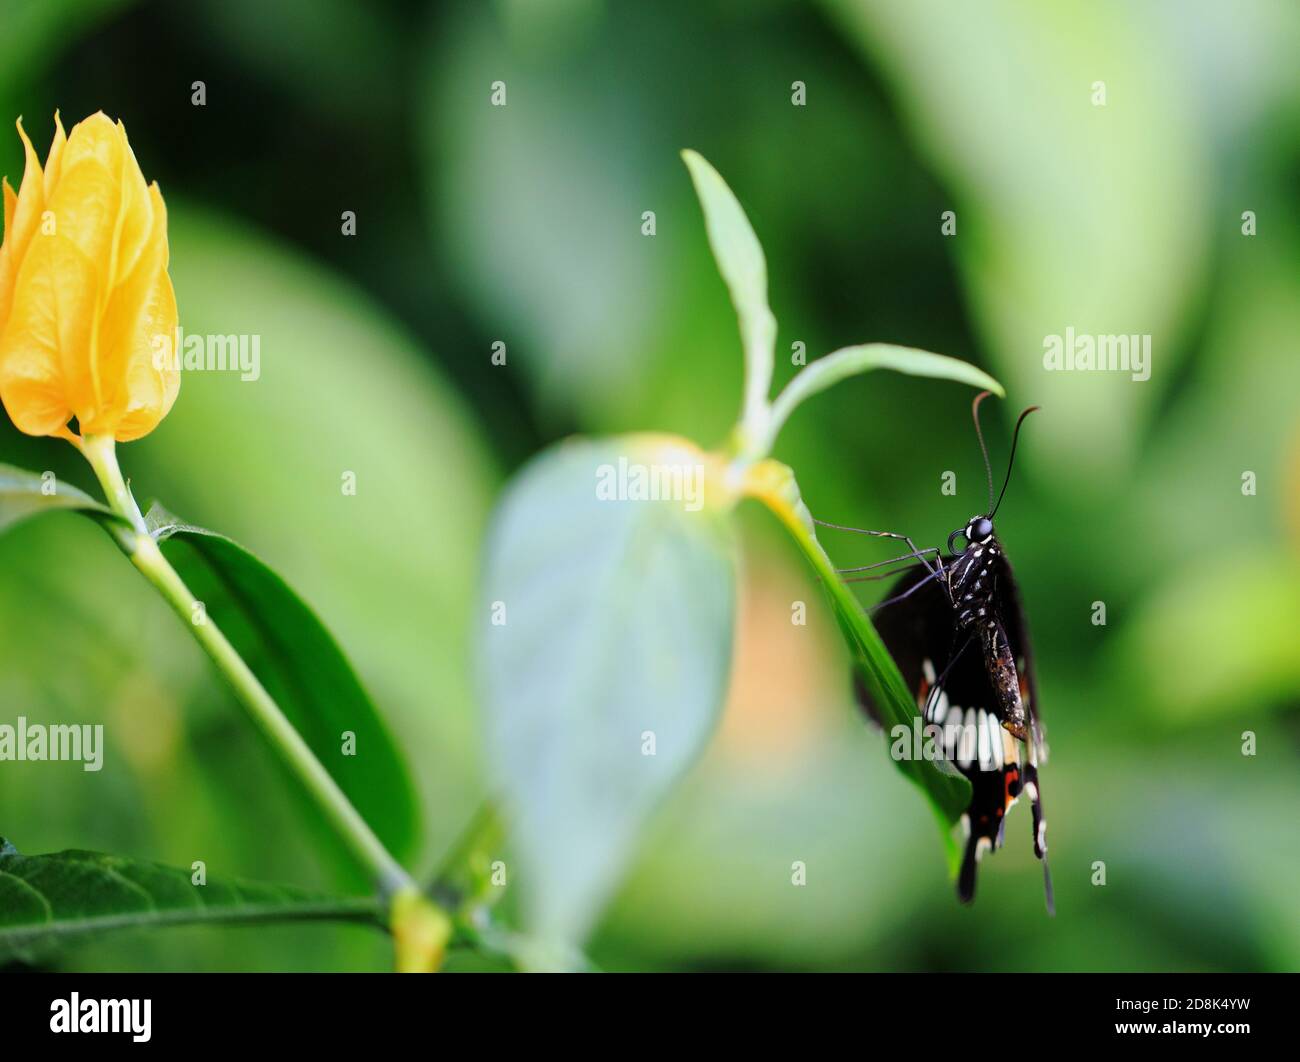 Close up of a Black Swallow tailed butterfly resting on a vibrant green leaf with a bright yellow flower in the background Stock Photo